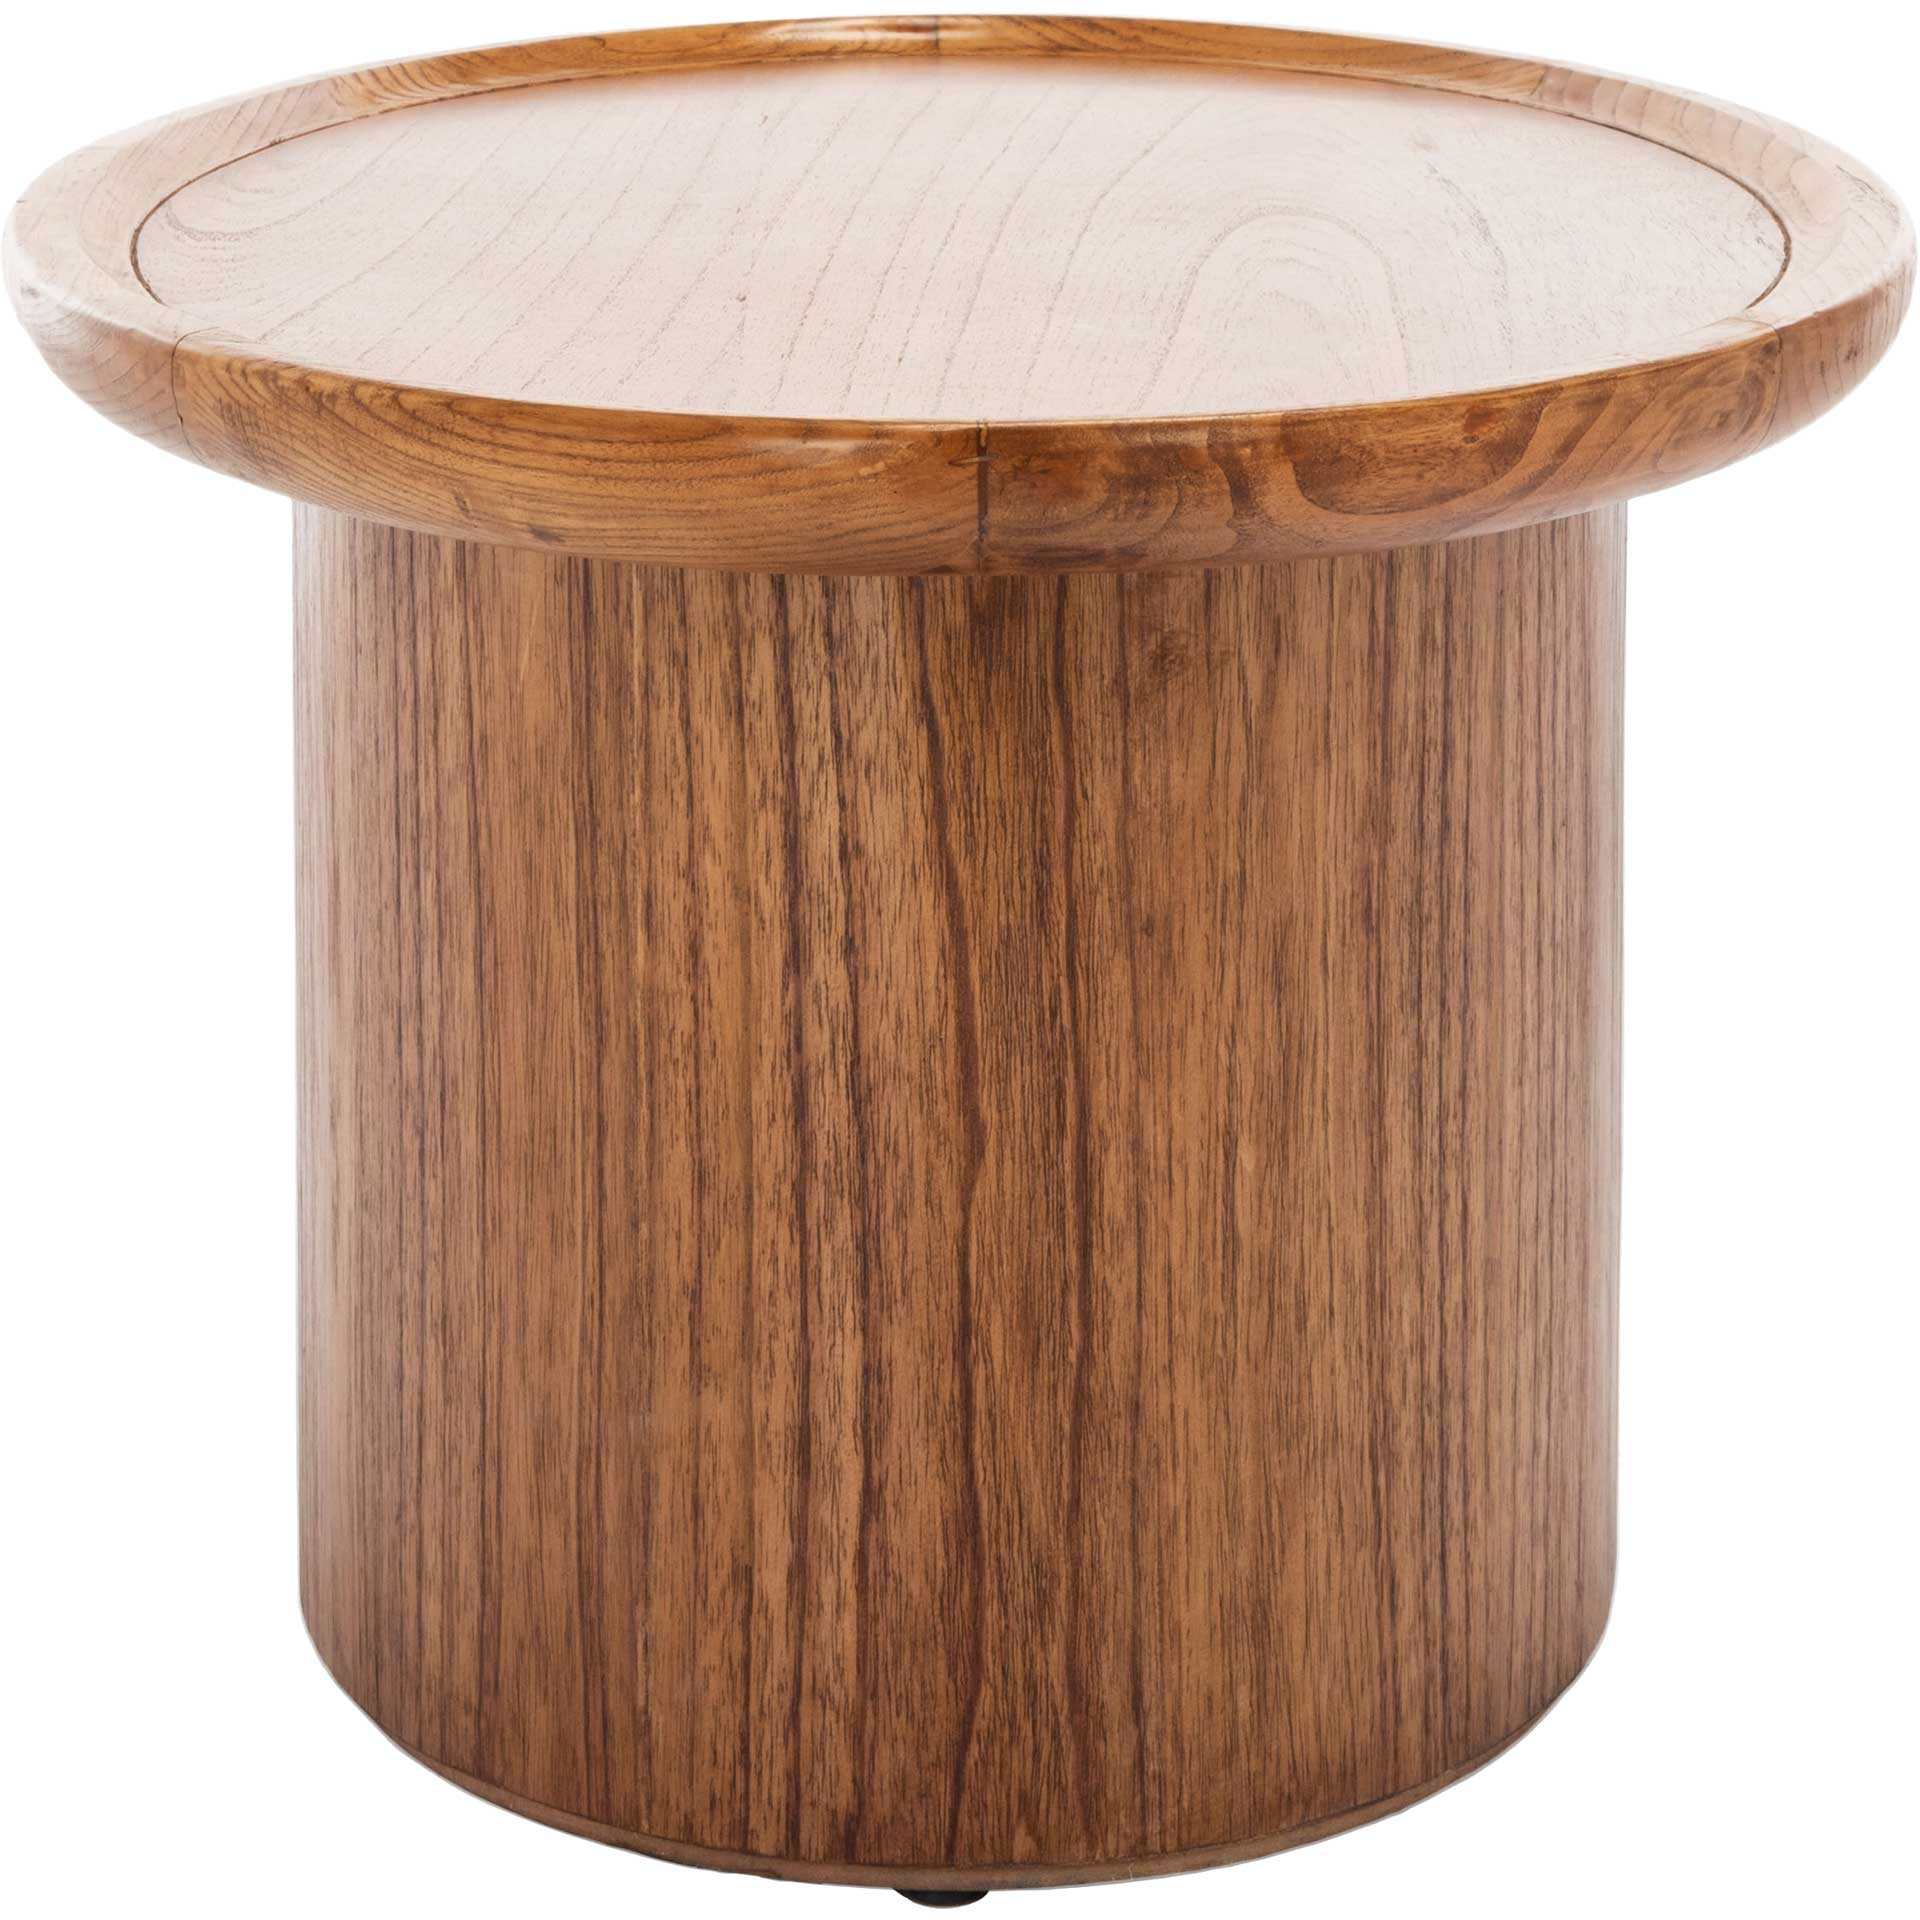 Fletcher Oval Coffee Table Natural